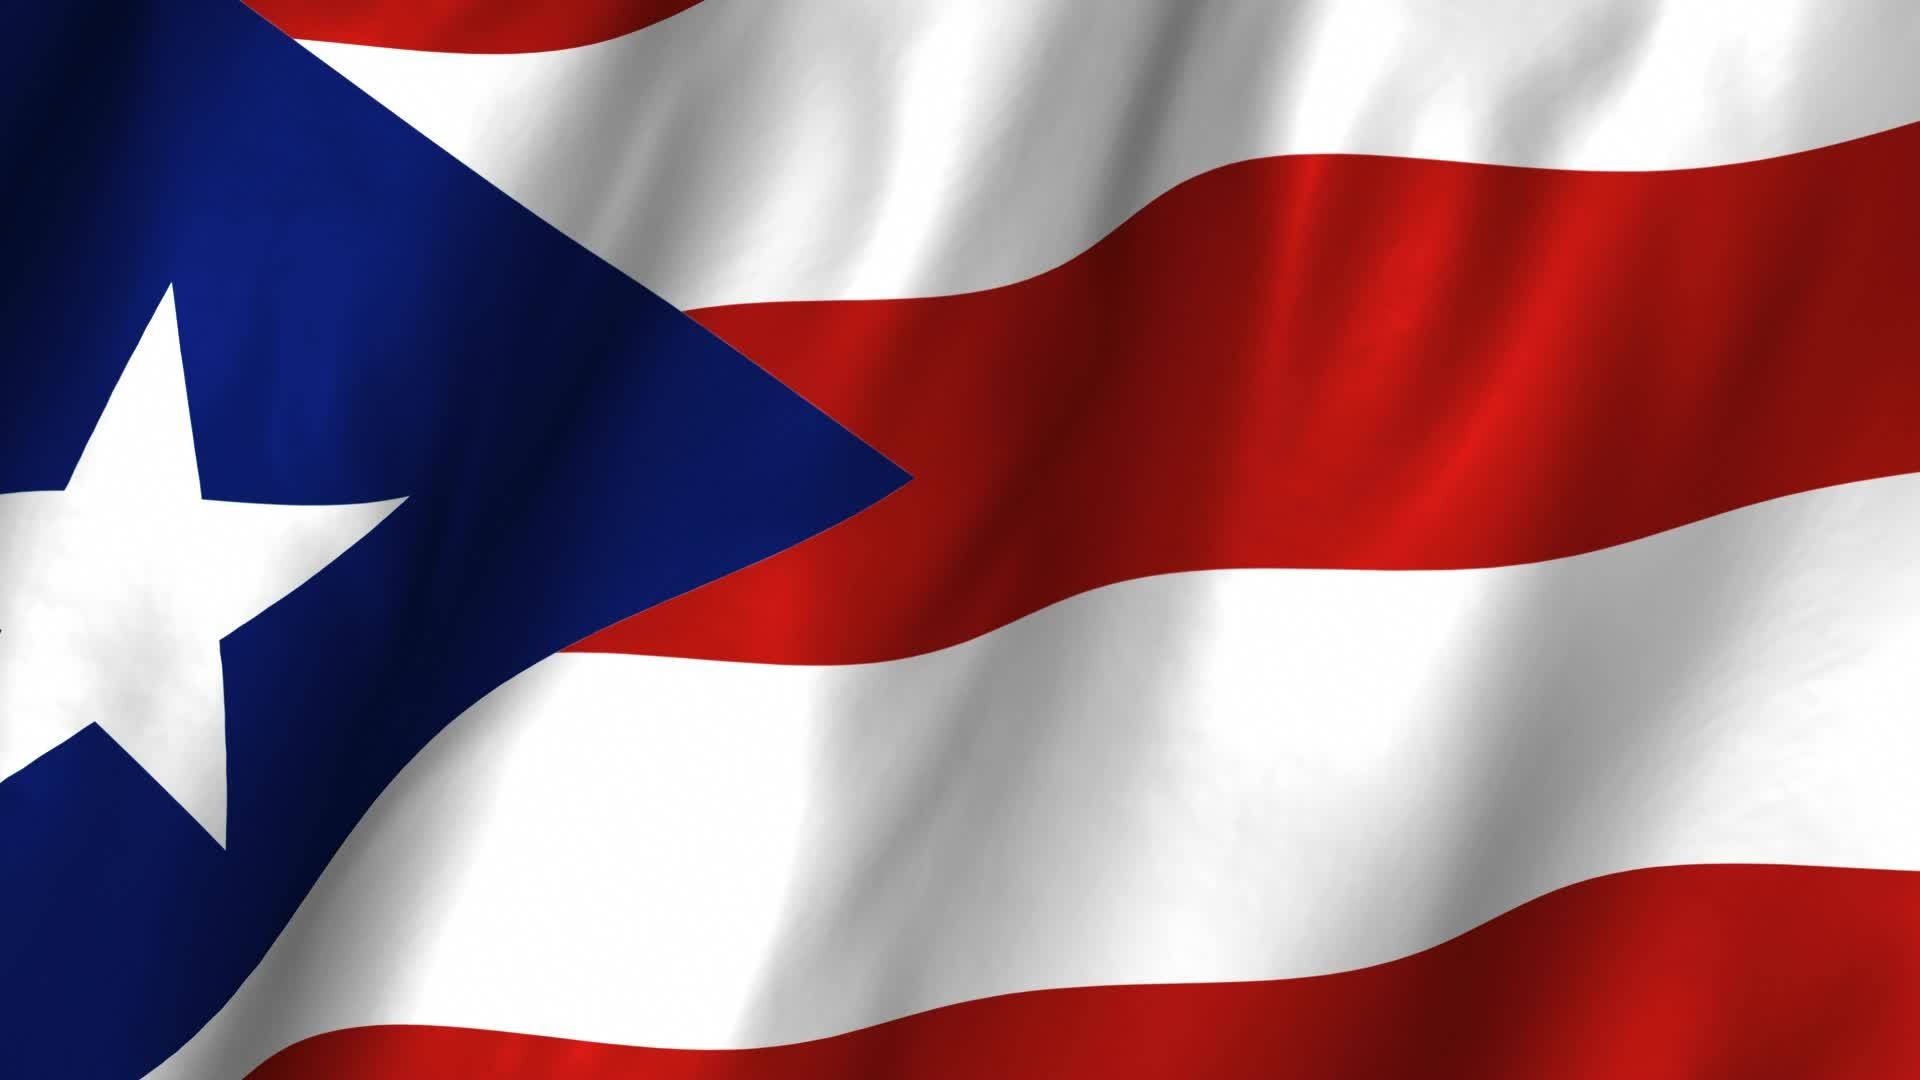 Puerto Rican Flag Waves Of Colors